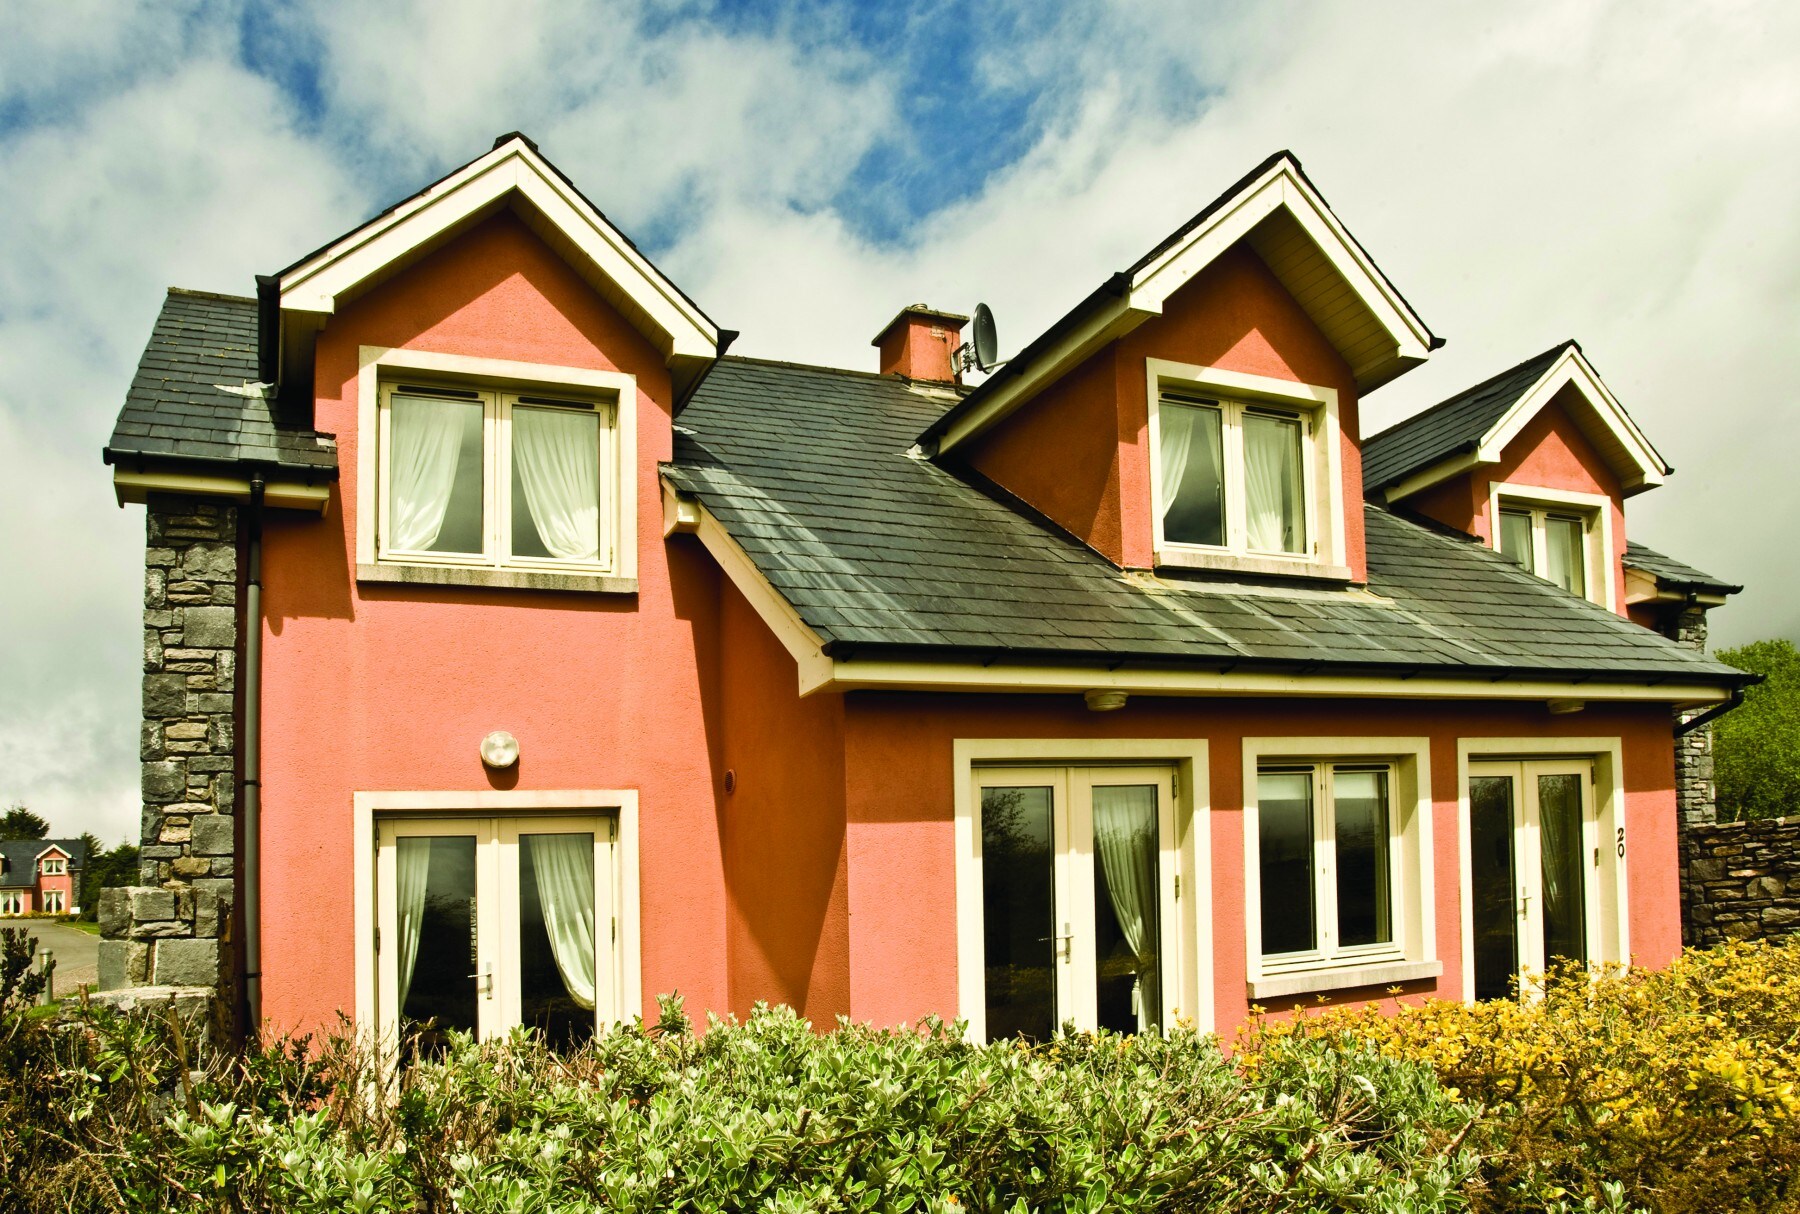 Ring of Kerry Holiday Cottages, Kenmare, County Kerry, Ireland